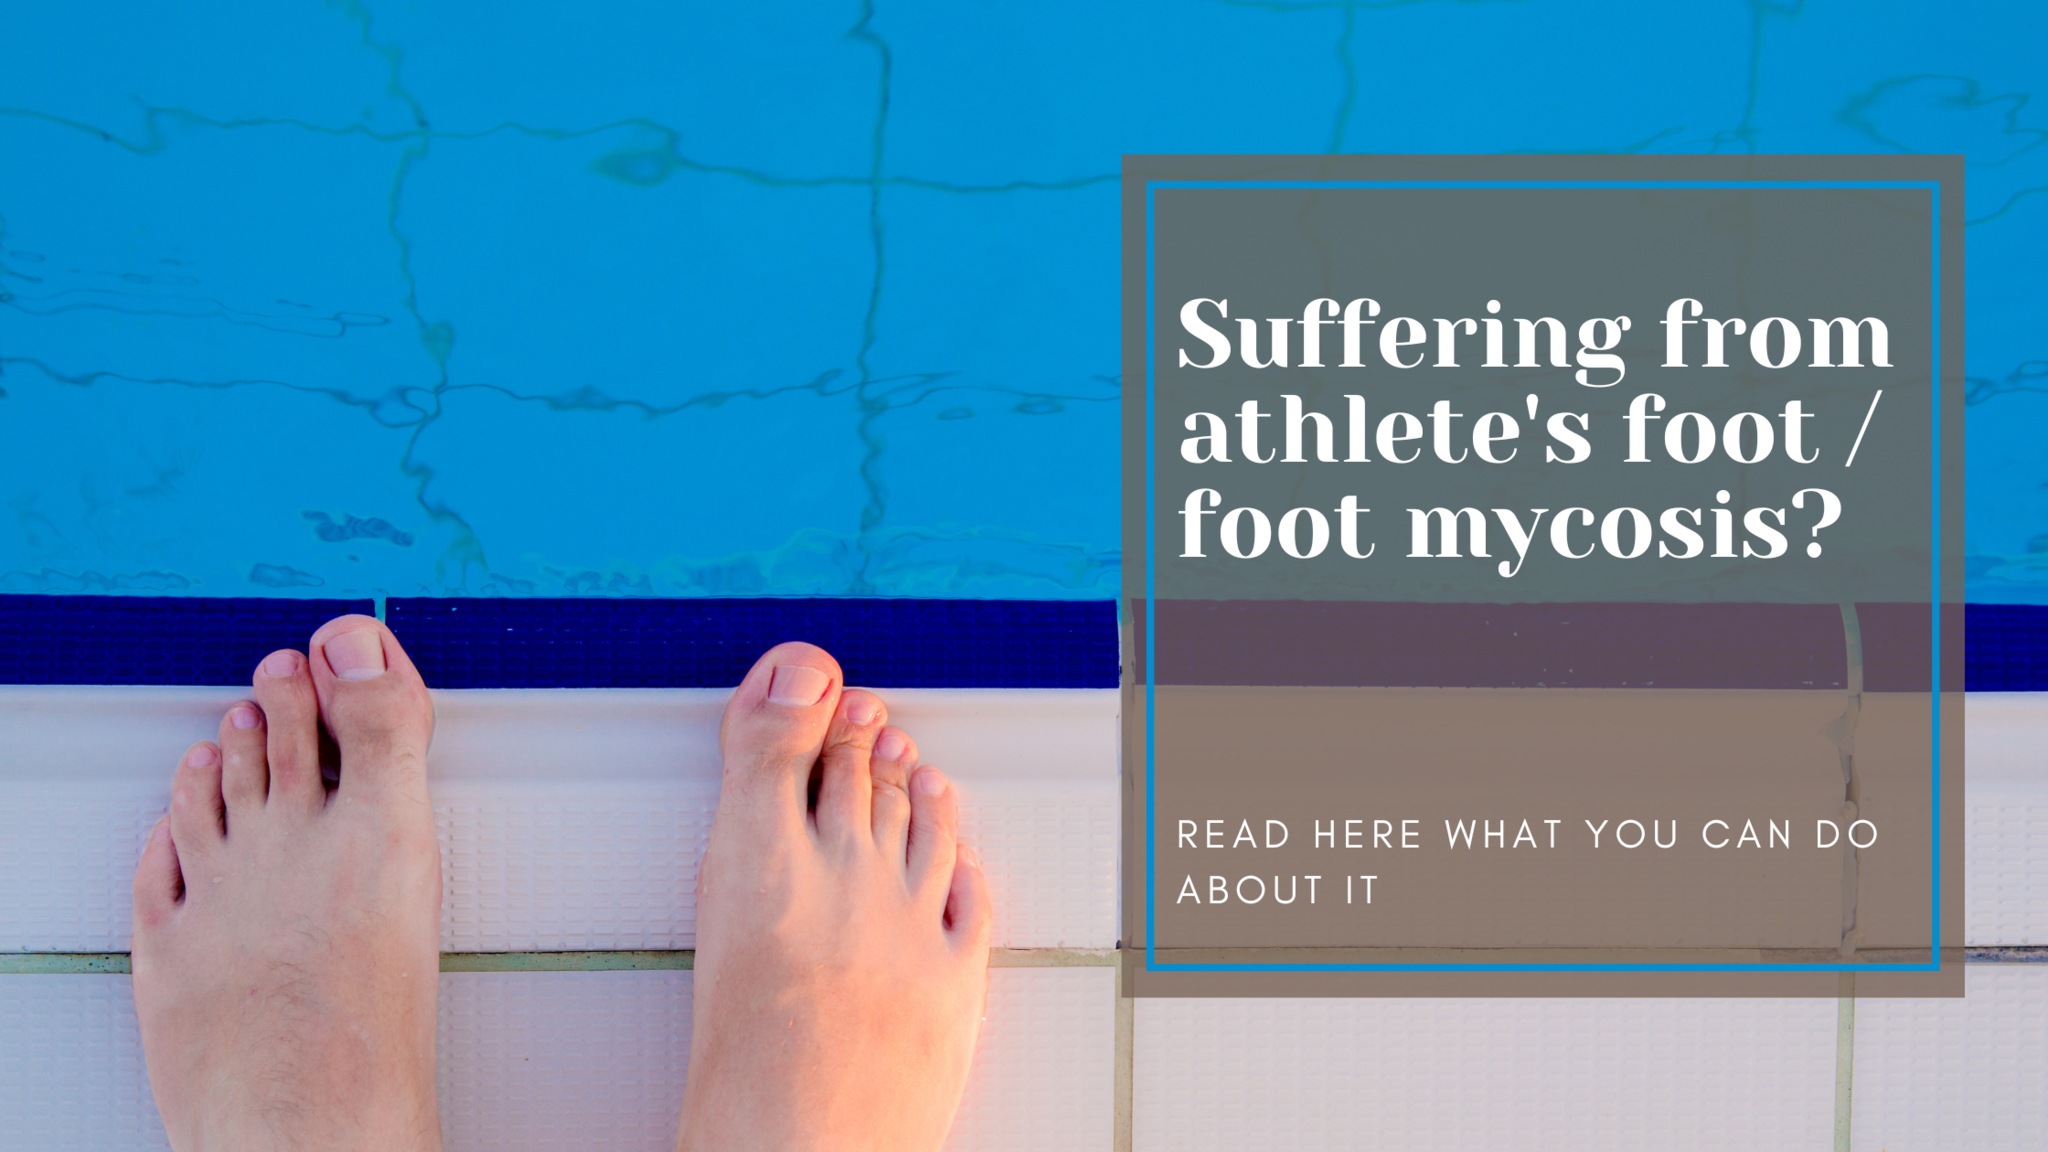 What can you do against foot mycosis (athlete's foot)?